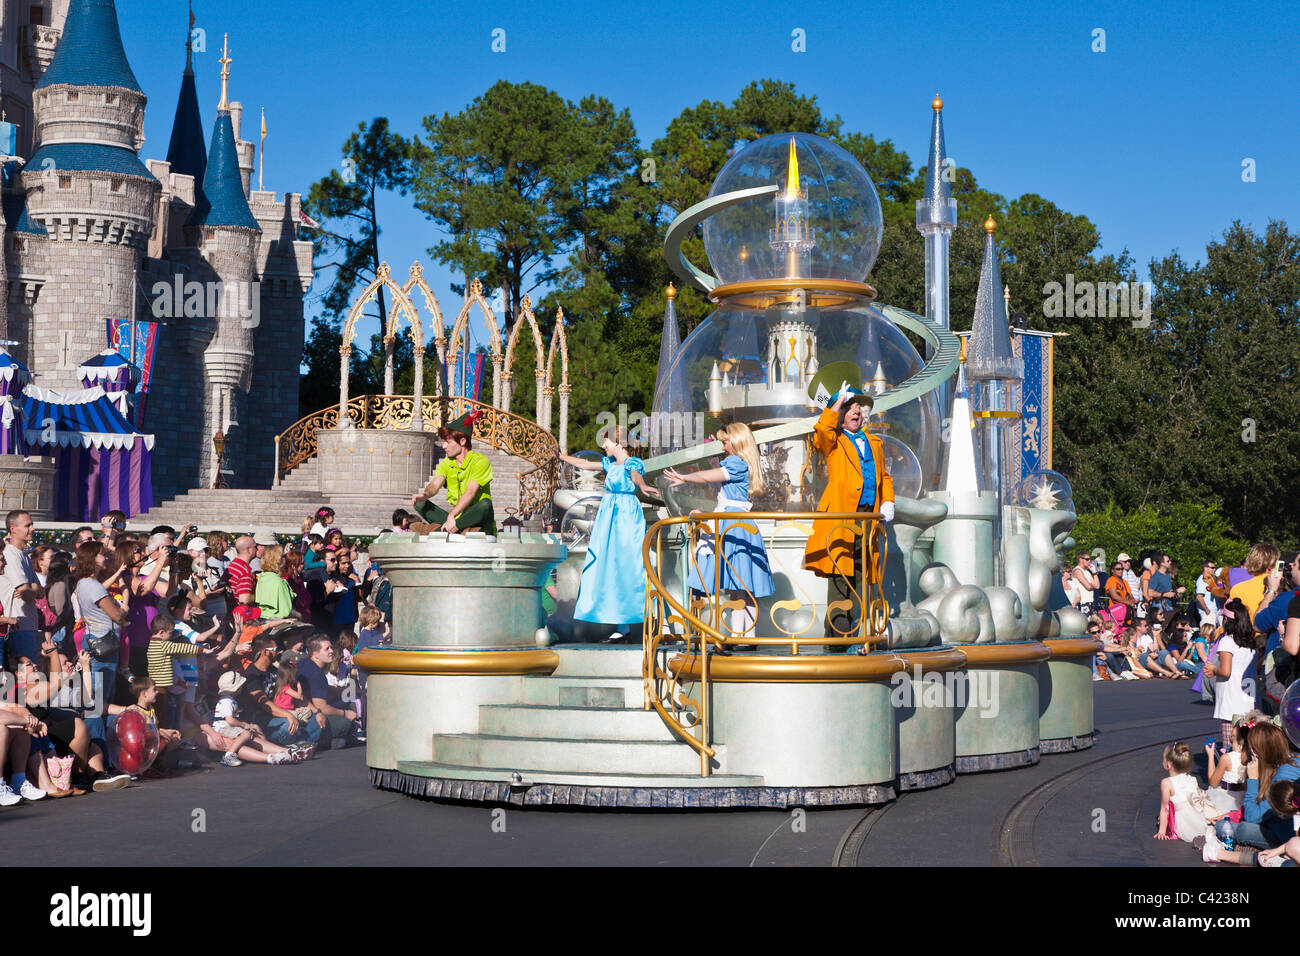 Disney characters ride a float in 'A Dream Come True' parade at the Magic Kingdom in Disney World, Kissimmee, Florida Stock Photo